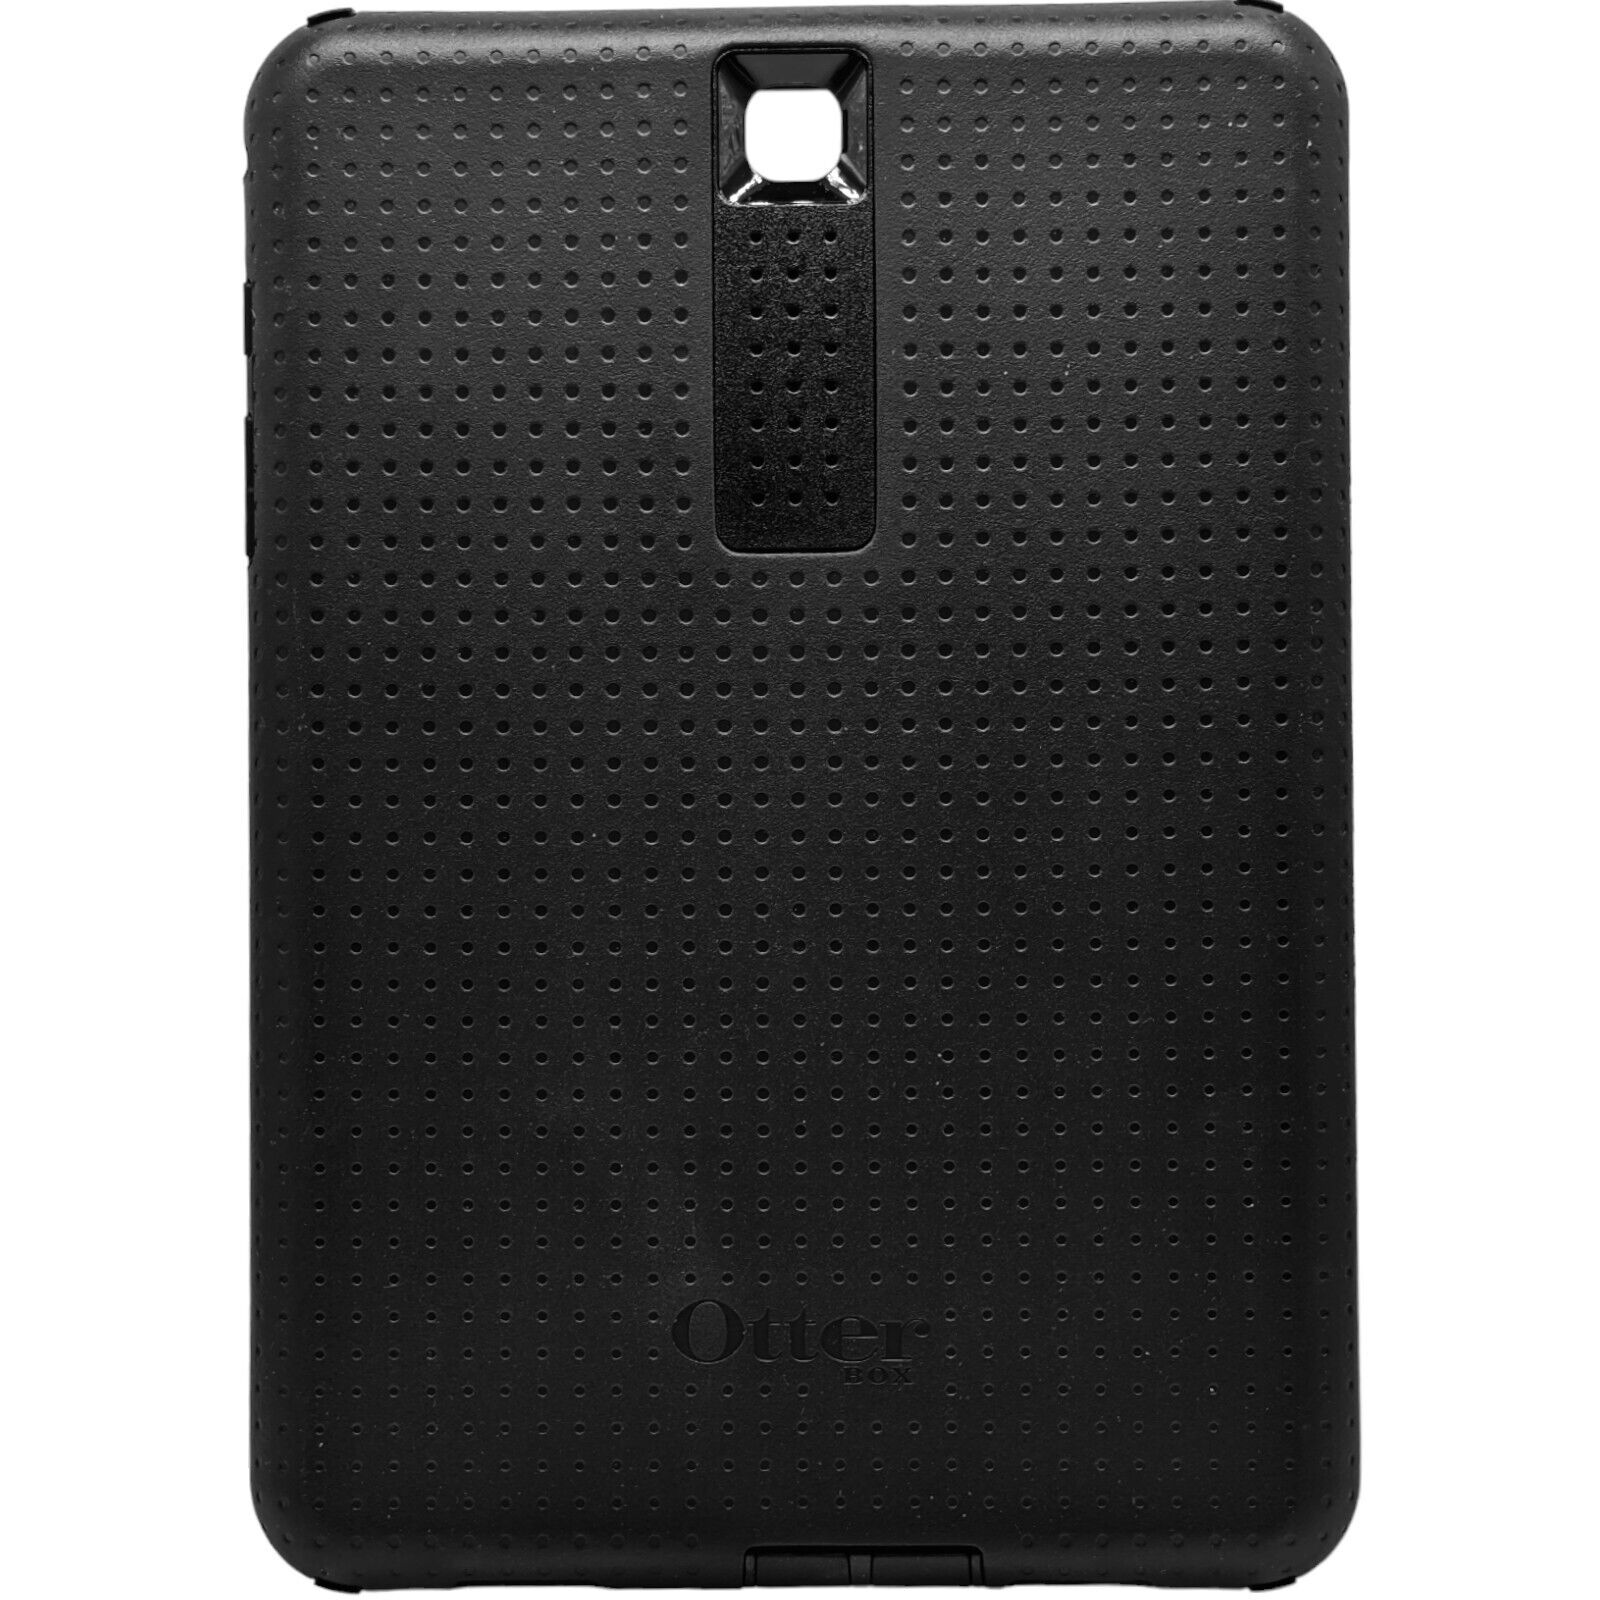 Otterbox Defender Rugged Black Tablet Case Cover for Samsung Galaxy Tab A 9.7 in